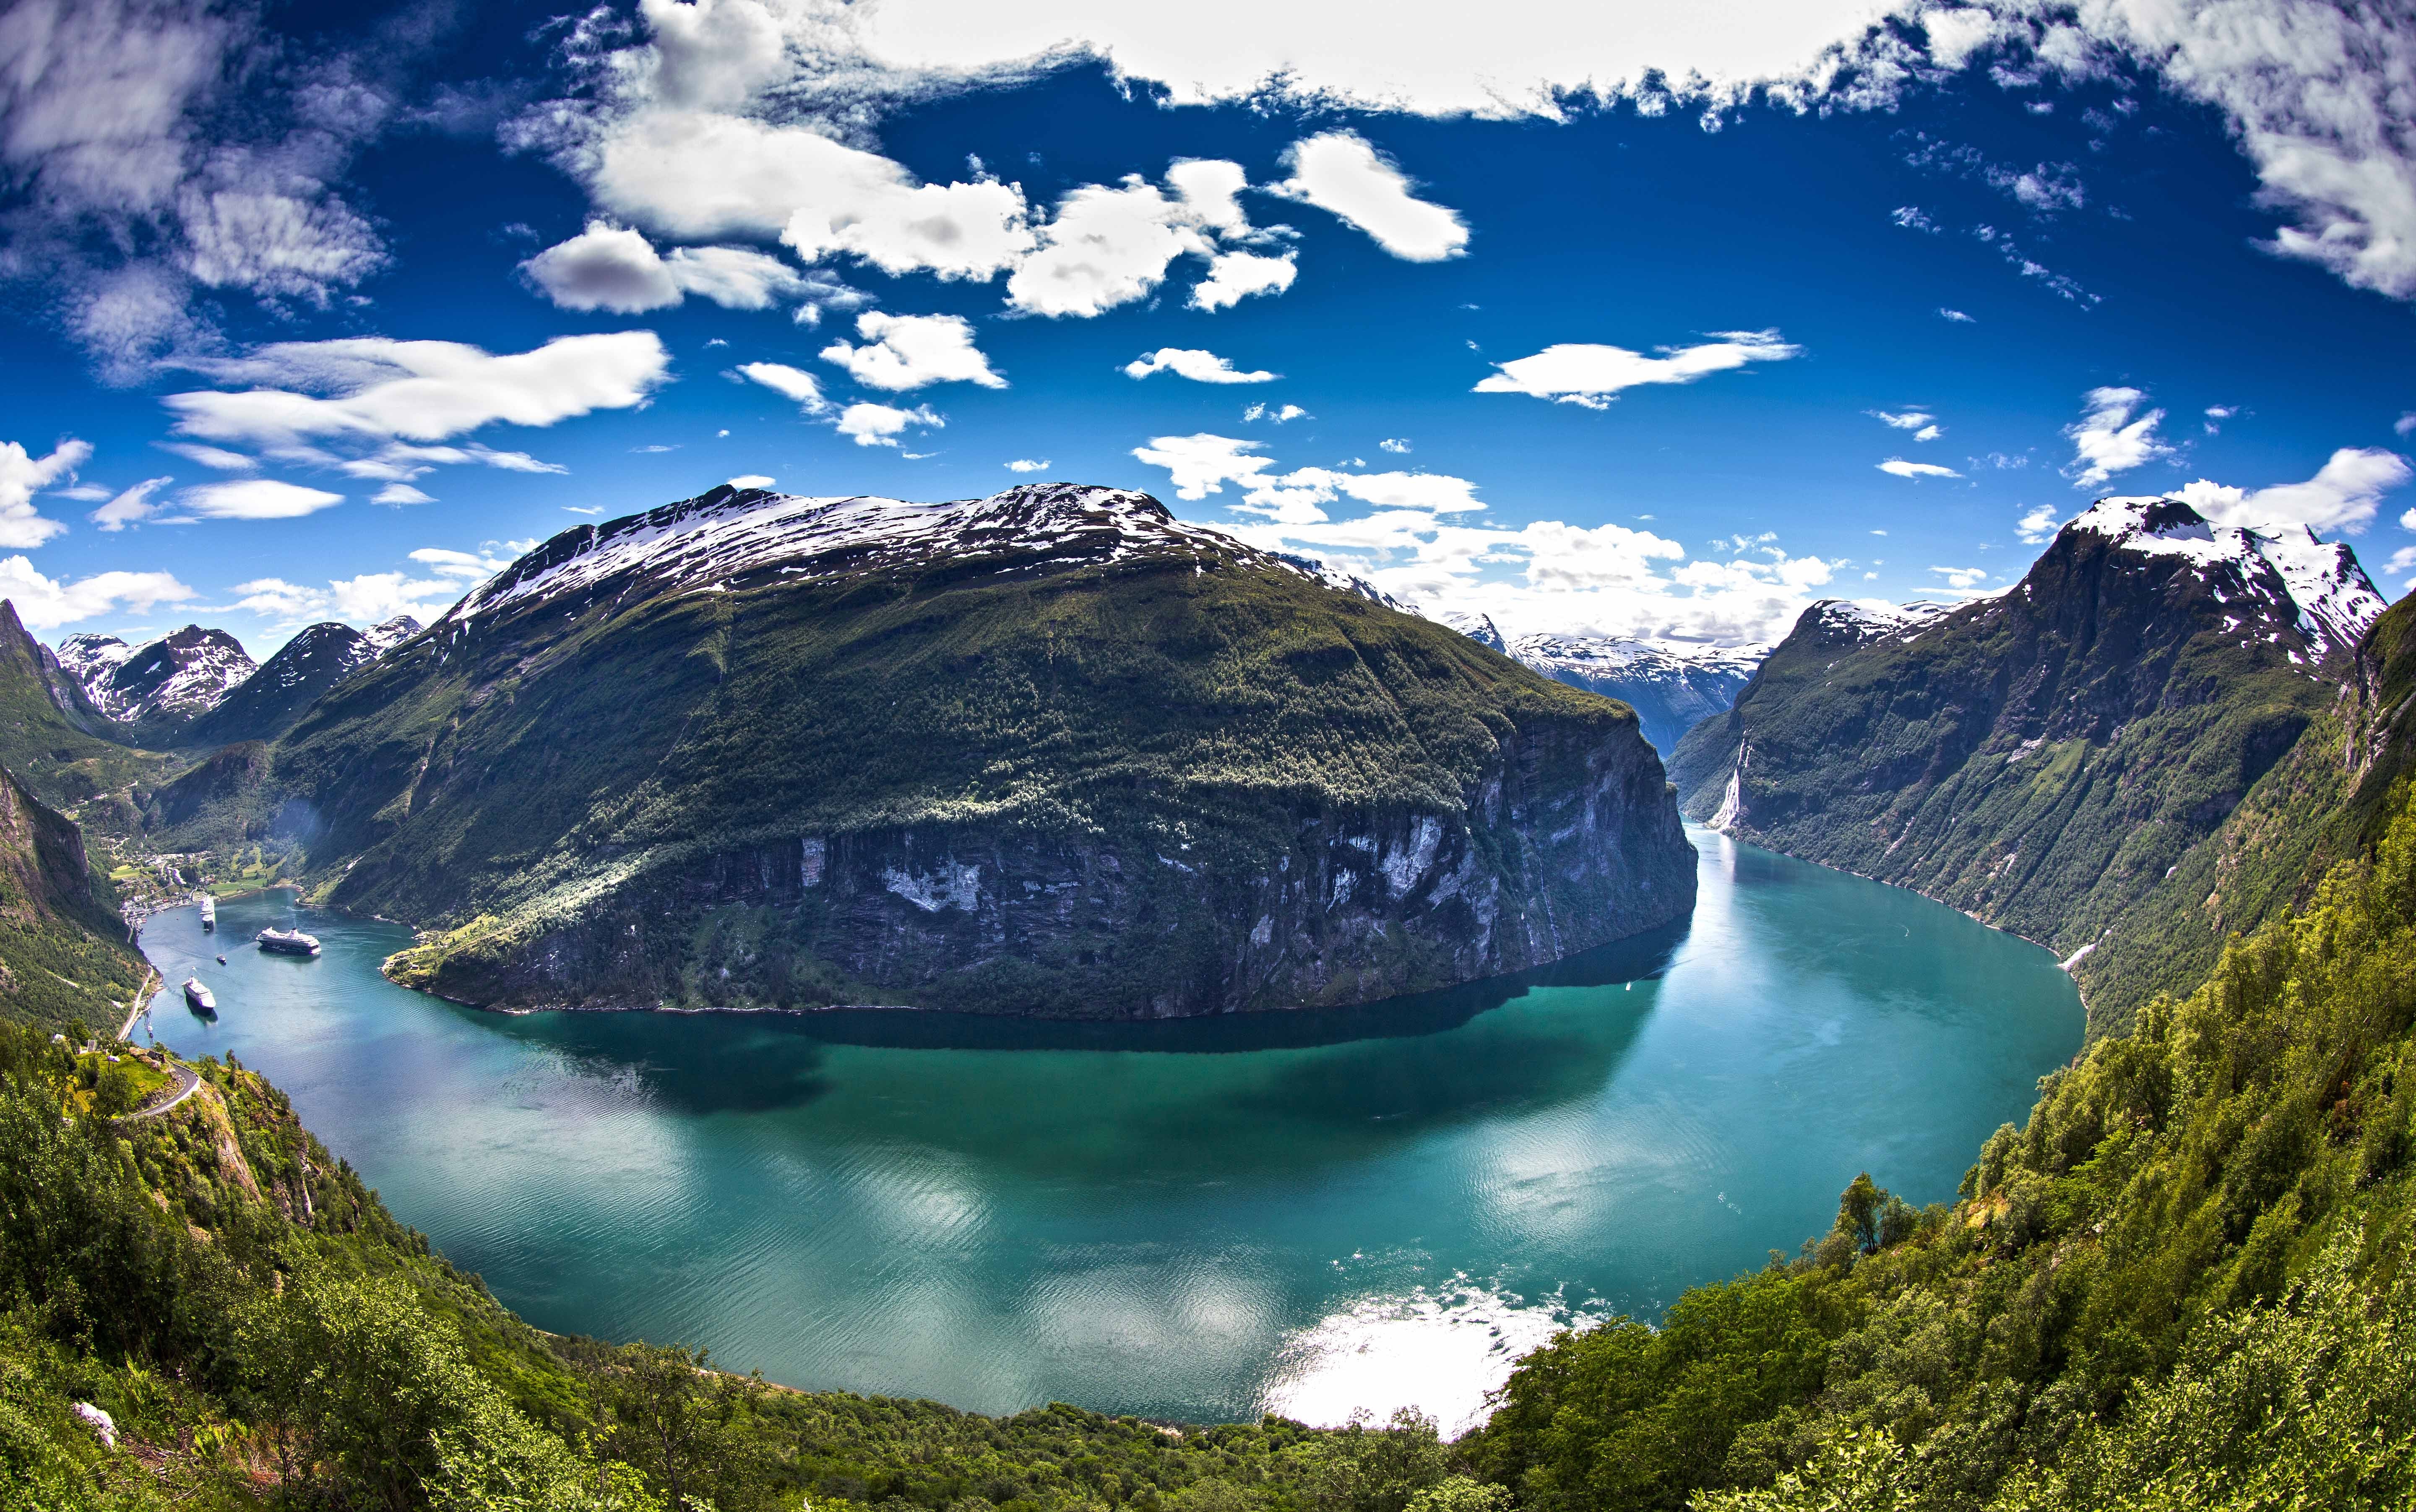 Panoramas Norway Geiranger Fjord Cruise Ship Mountains Forest Snowy Peak Clouds Water Green Blue Whi 5760x3605